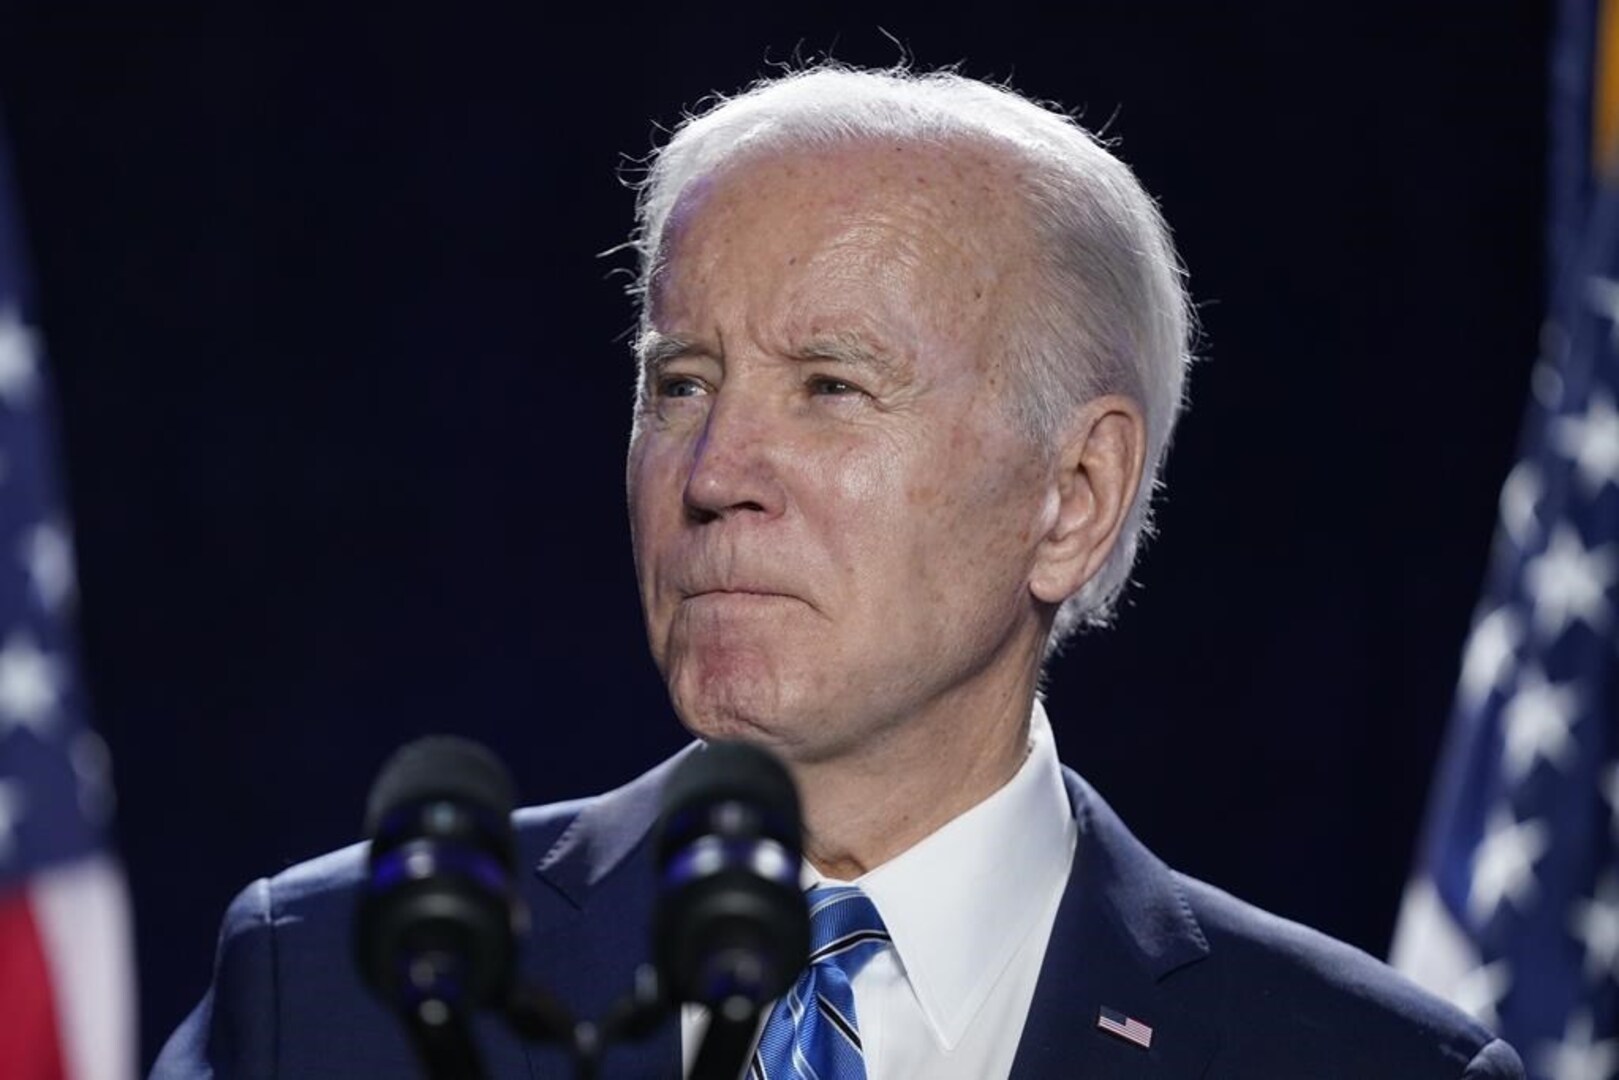 Biden campaigning on abortion rights